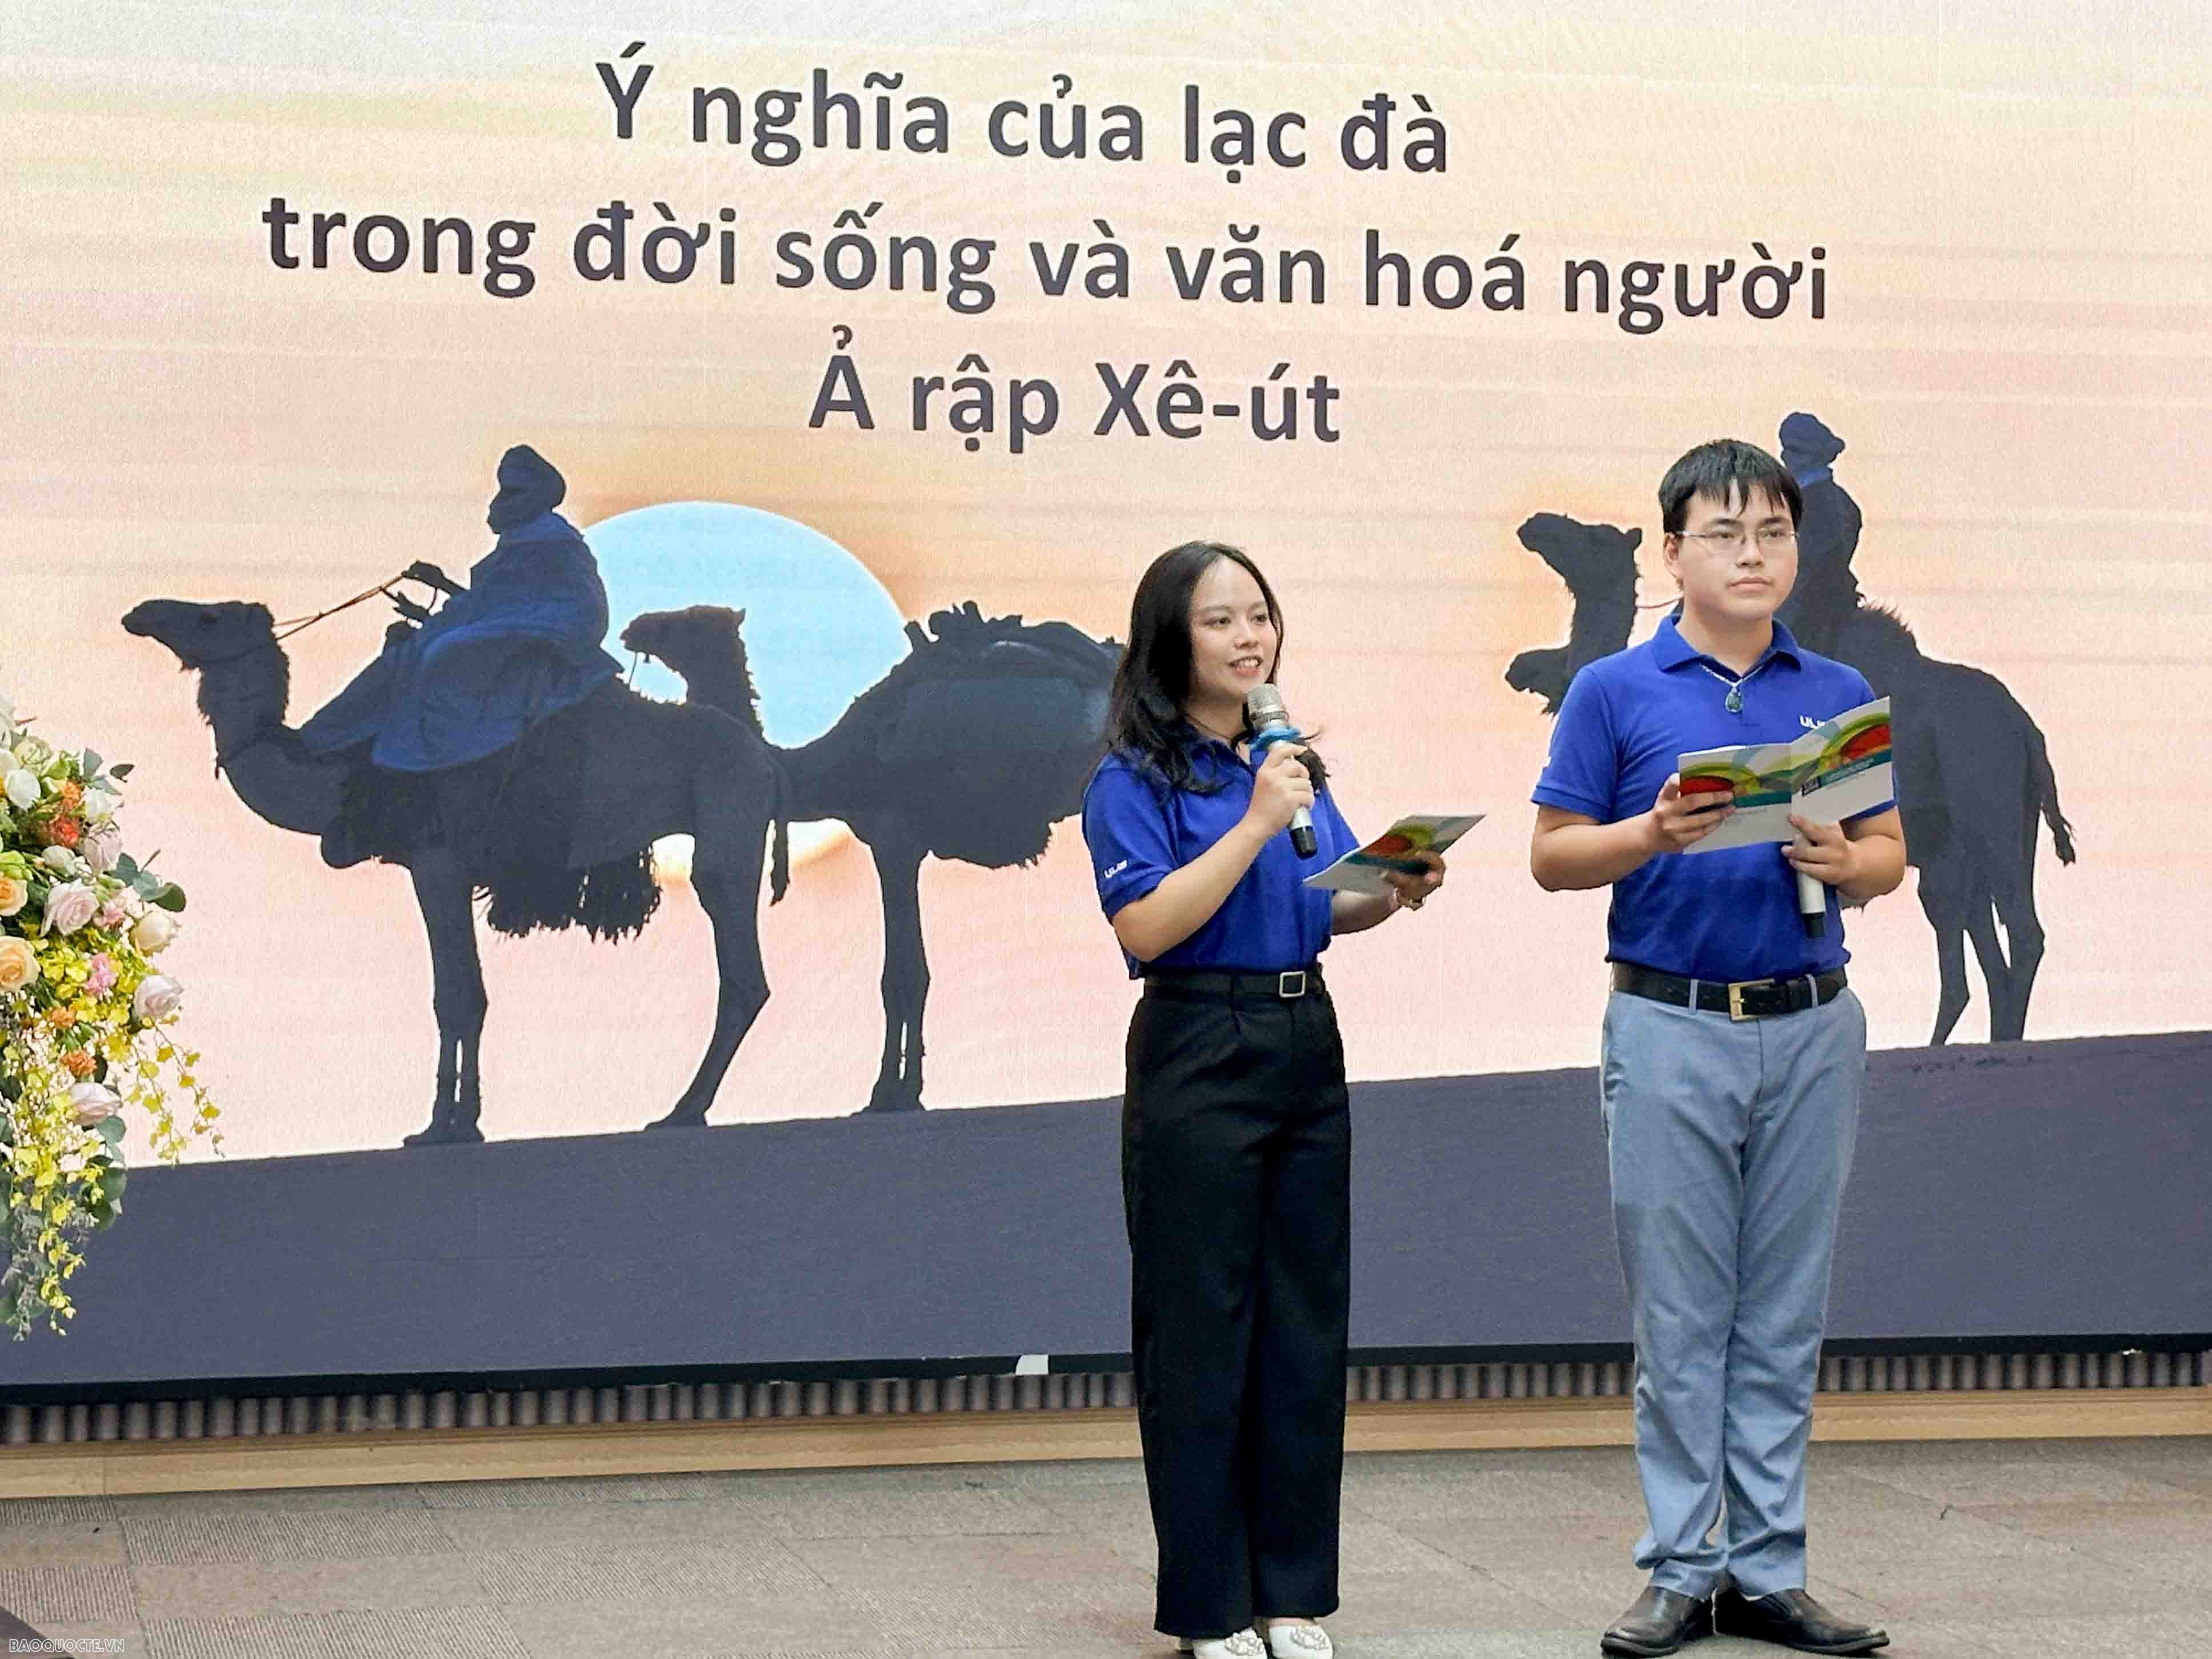 World Camel Day observed in Vietnam for first time: Celebration of the Year of Camelids in Hanoi